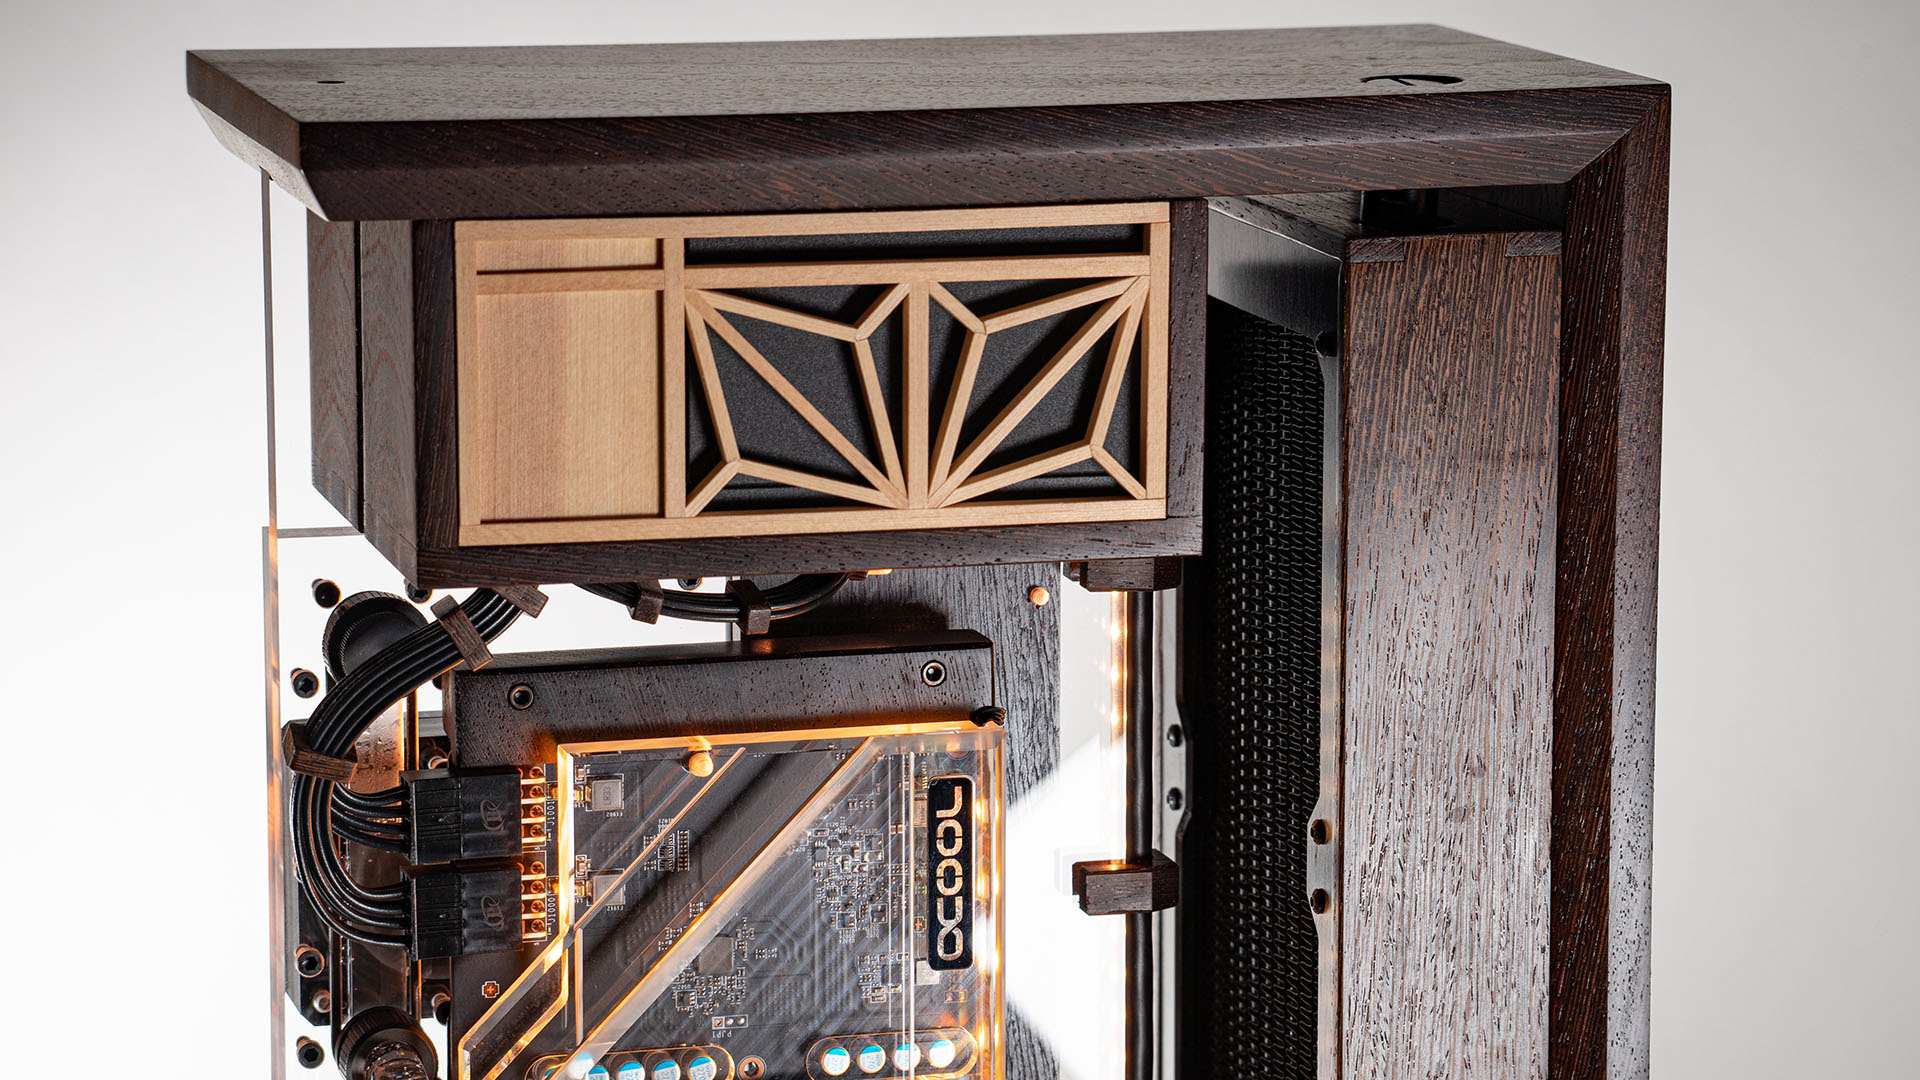 This stunning AMD-powered gaming PC uses Japanese Kumiko techniques